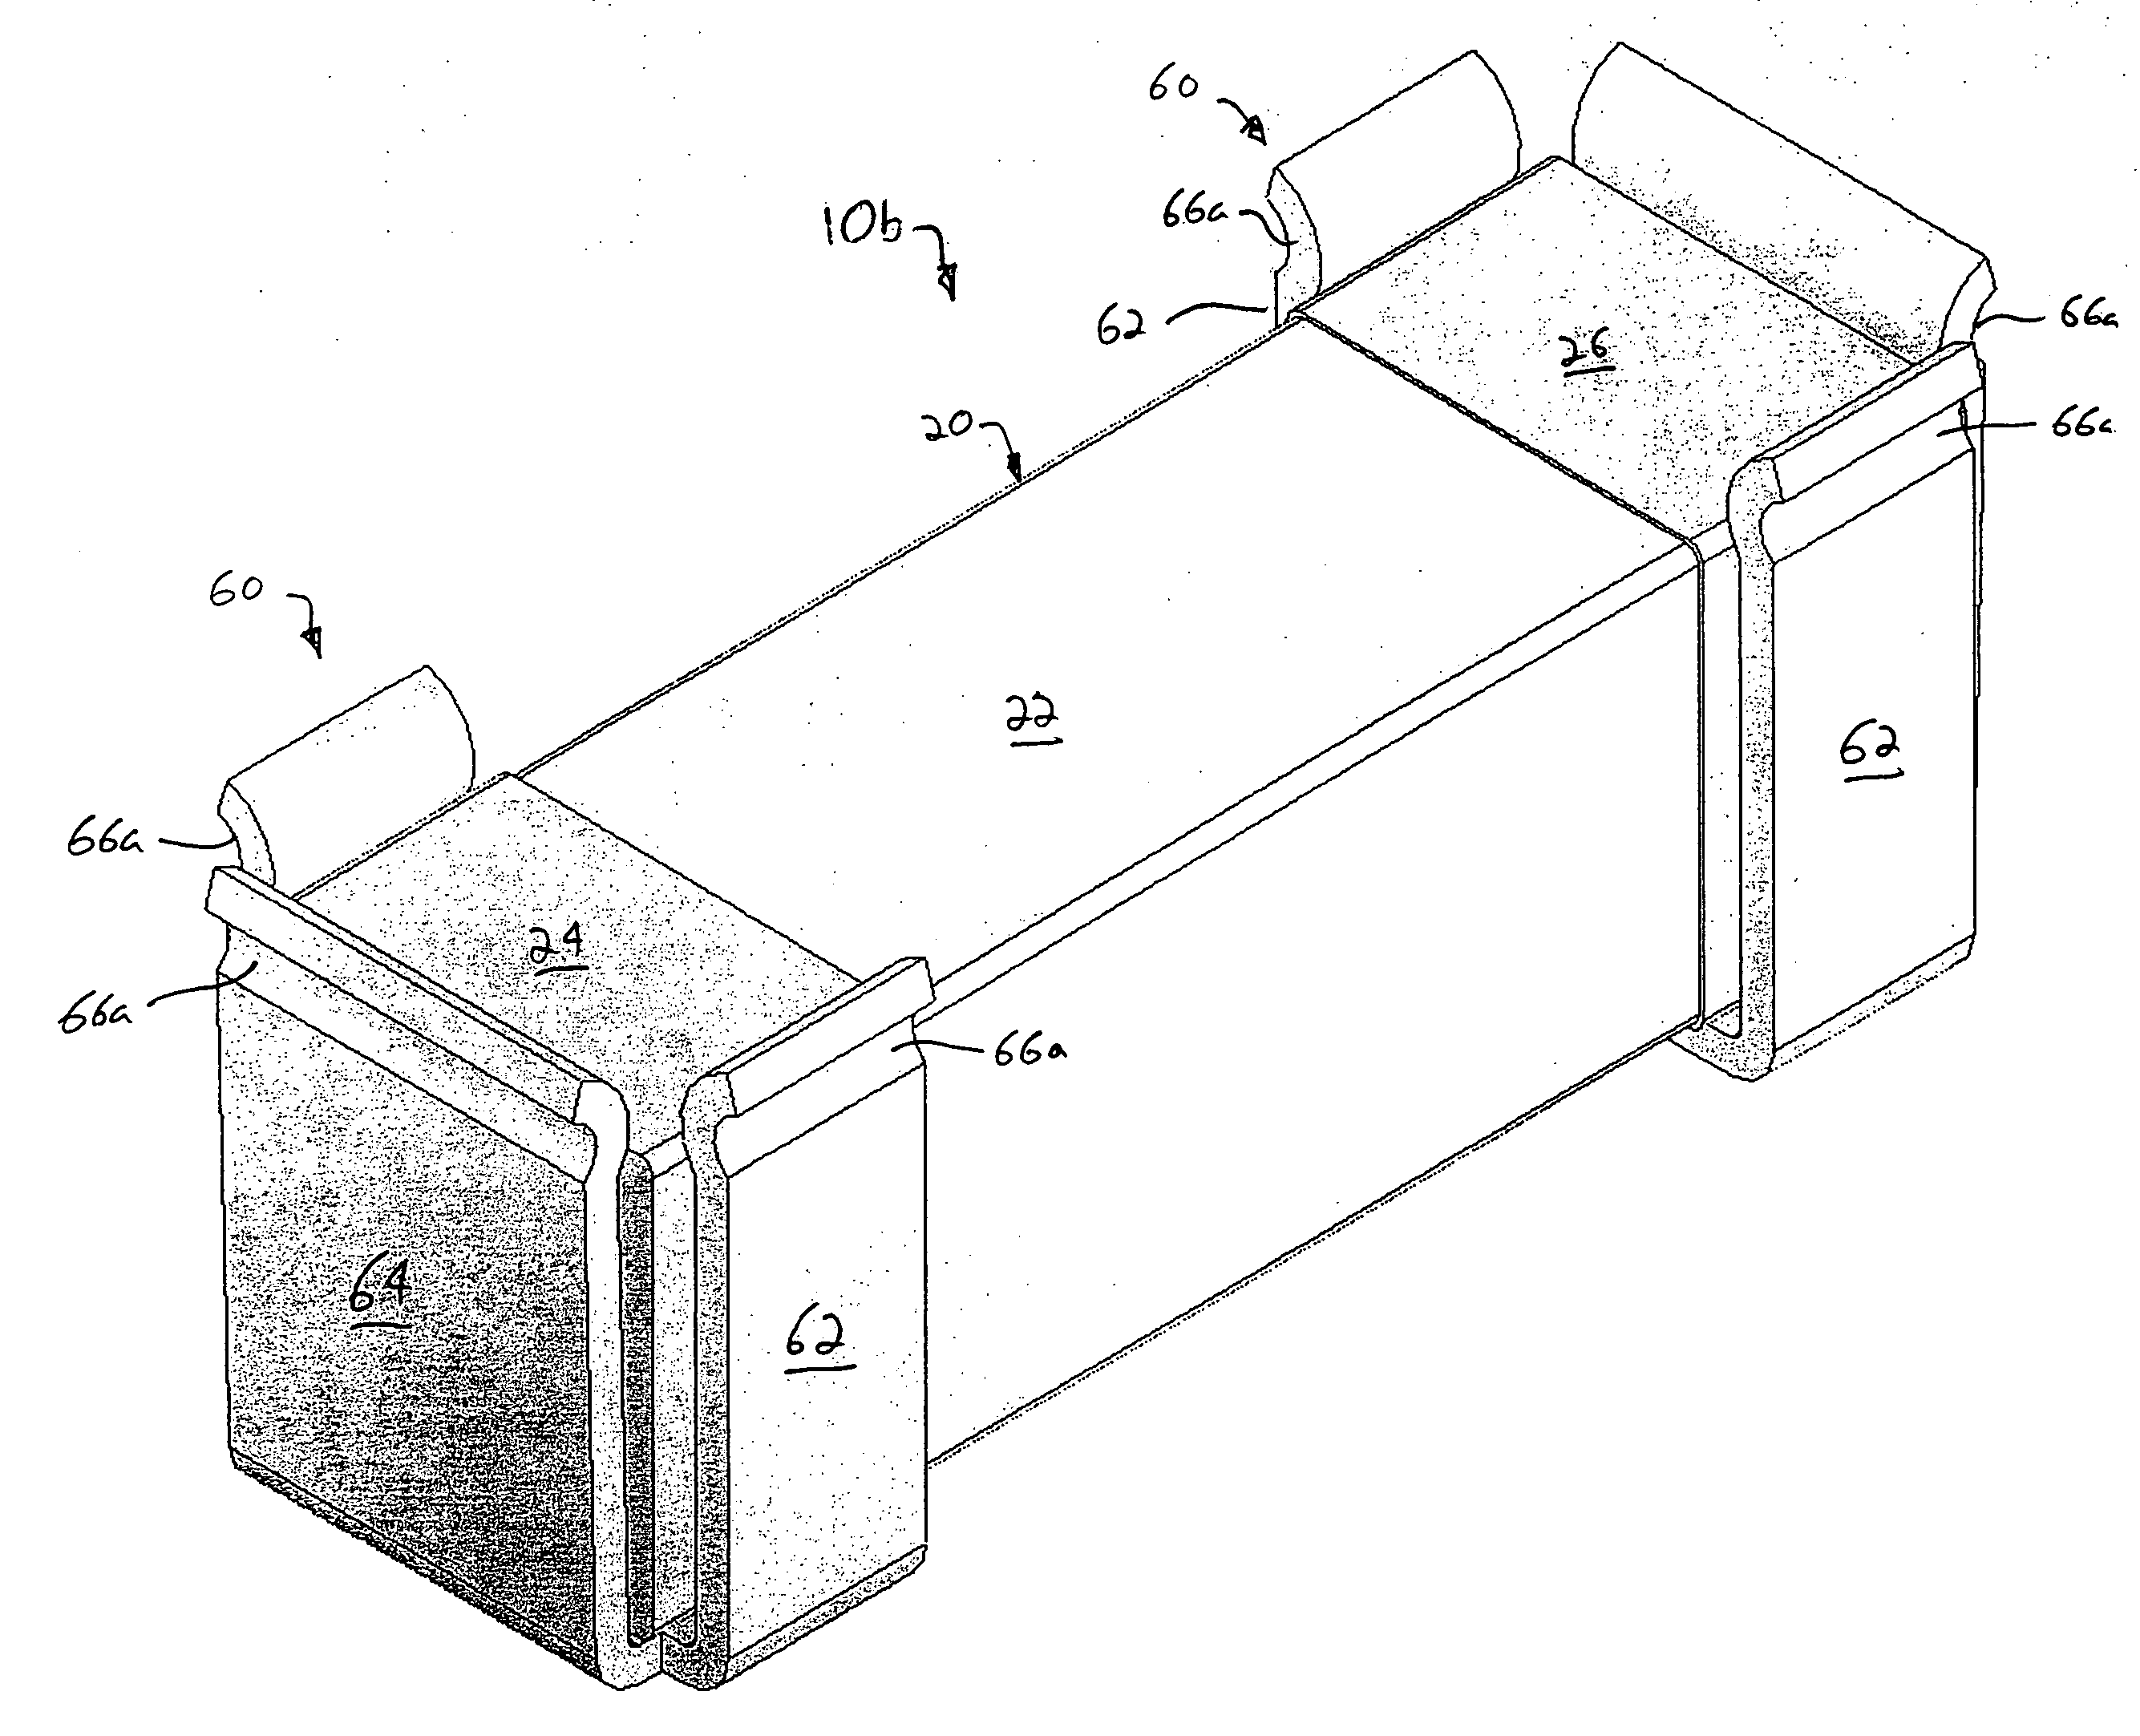 Thermally decoupling fuse holder and assembly